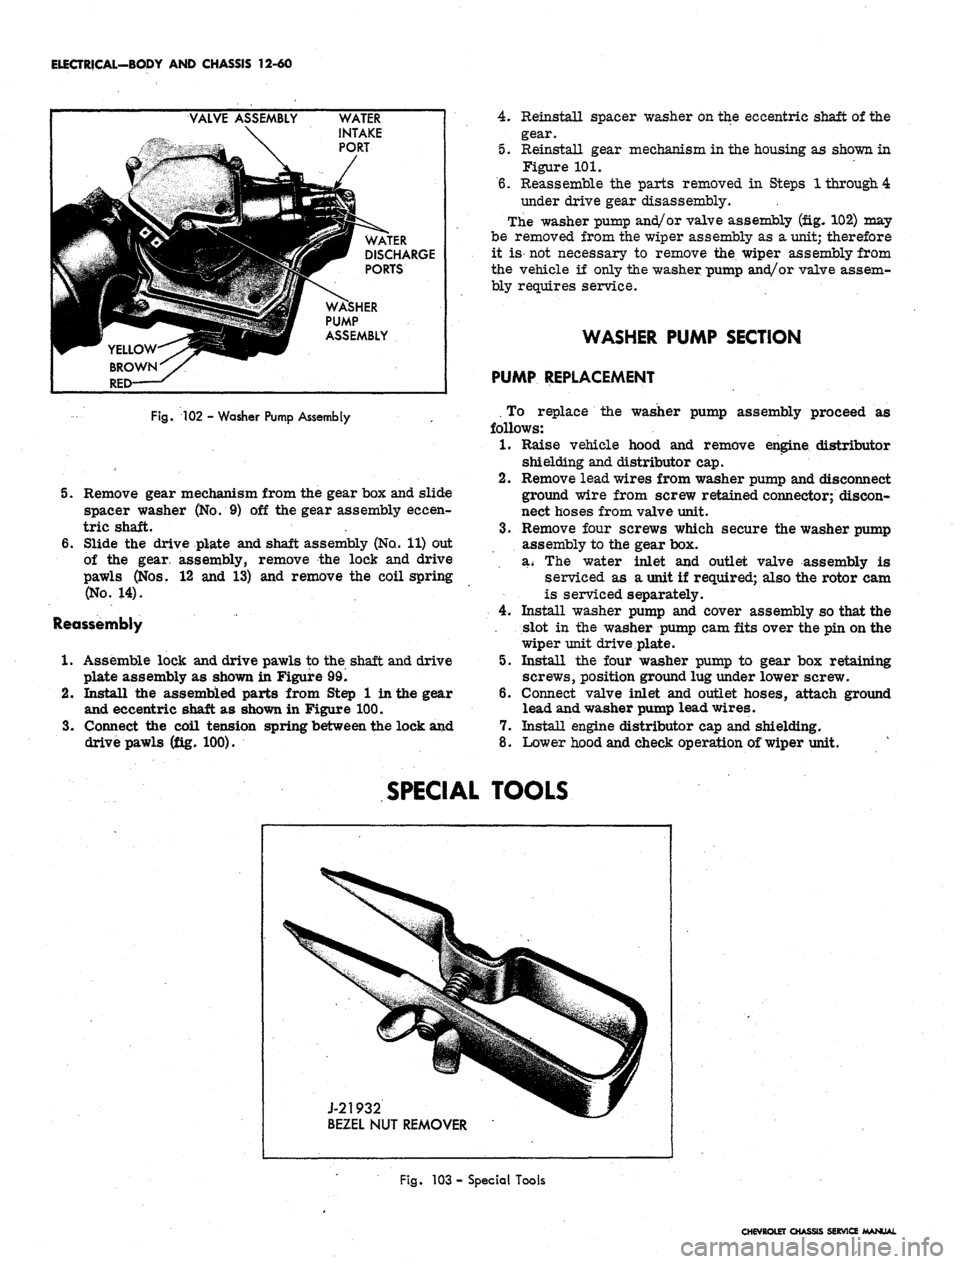 CHEVROLET CAMARO 1967 1.G Chassis Workshop Manual 
ELECTRICAL-BODY AND CHASSIS 12-60

....
 £ 
VALVE ASSEMBLY

mm

BROWN
 *yr

RED  
WATER

INTAKE

PORT

|f|i

Wjjm WATER

|HP DISCHARGE

W PORTS

WASHER

PUMP

ASSEMBLY

Fig.
 102 - Washer Pump Asse